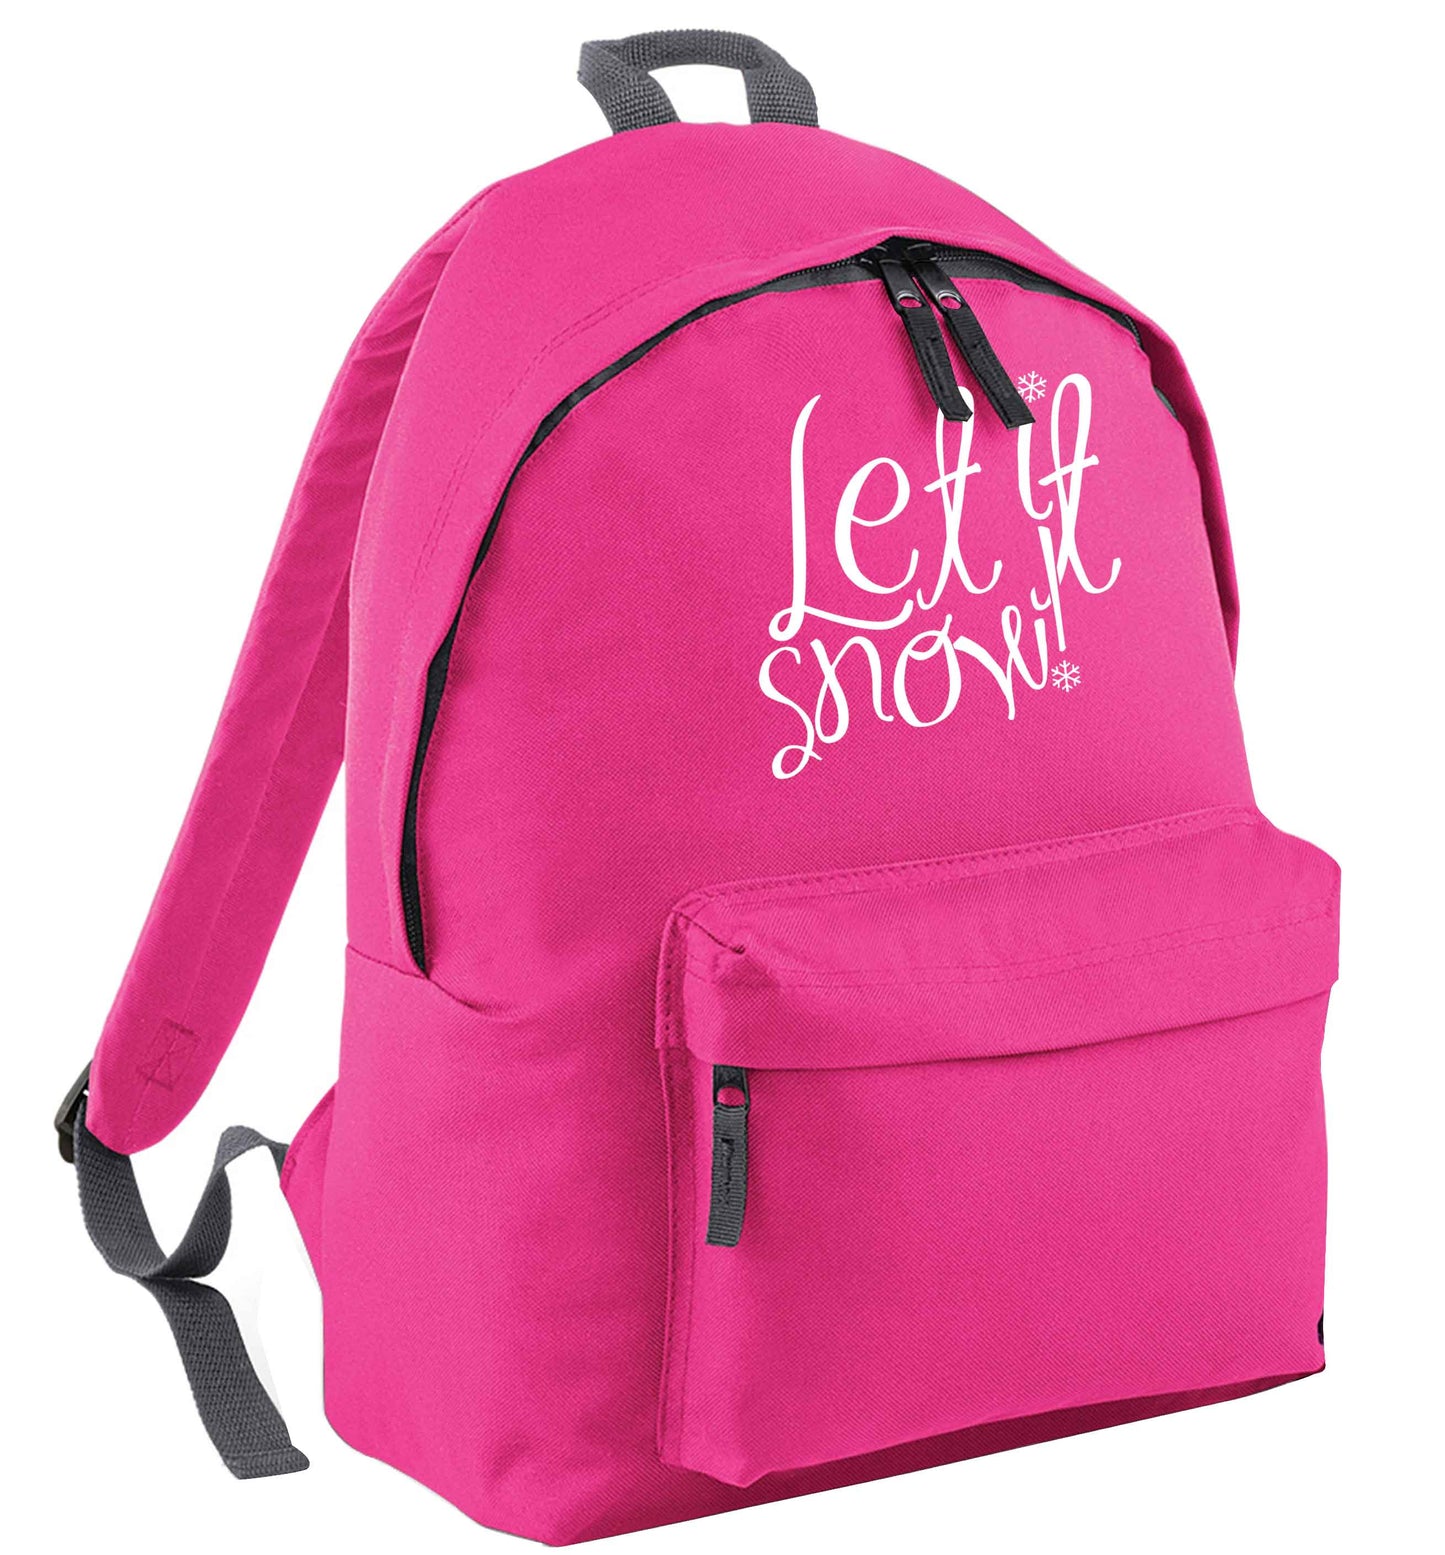 Let it snow pink adults backpack